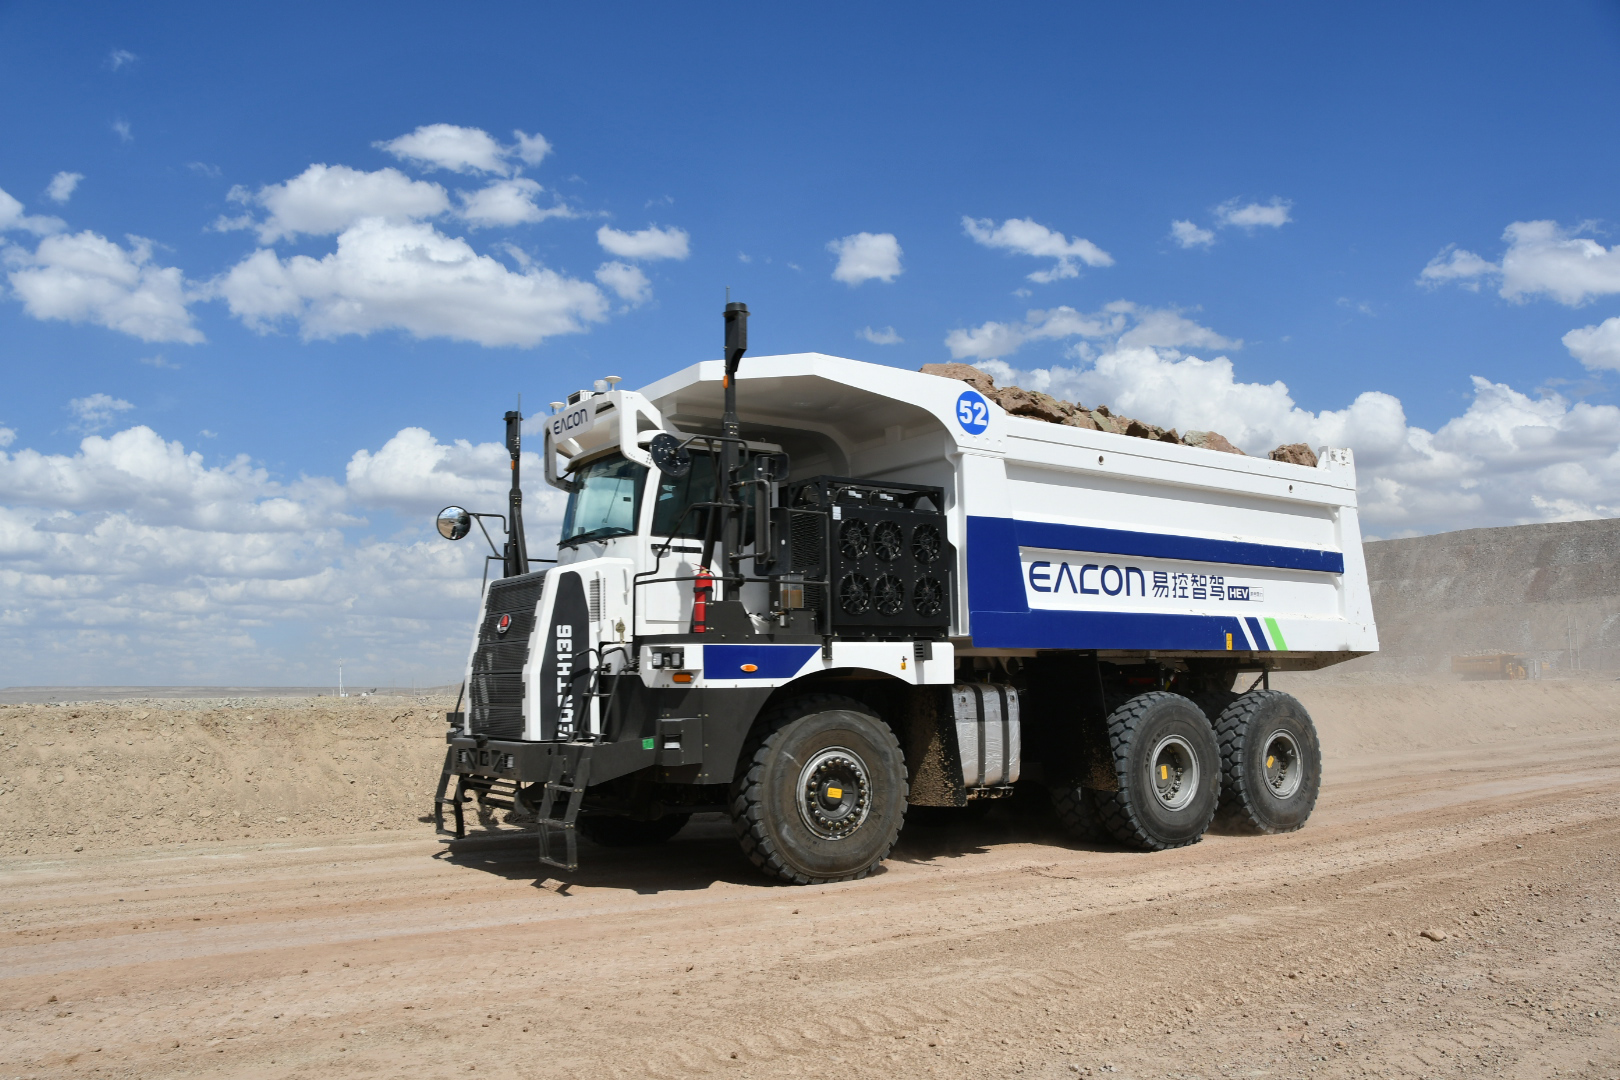 EACON brings speed, precision and capability to auto-mining market